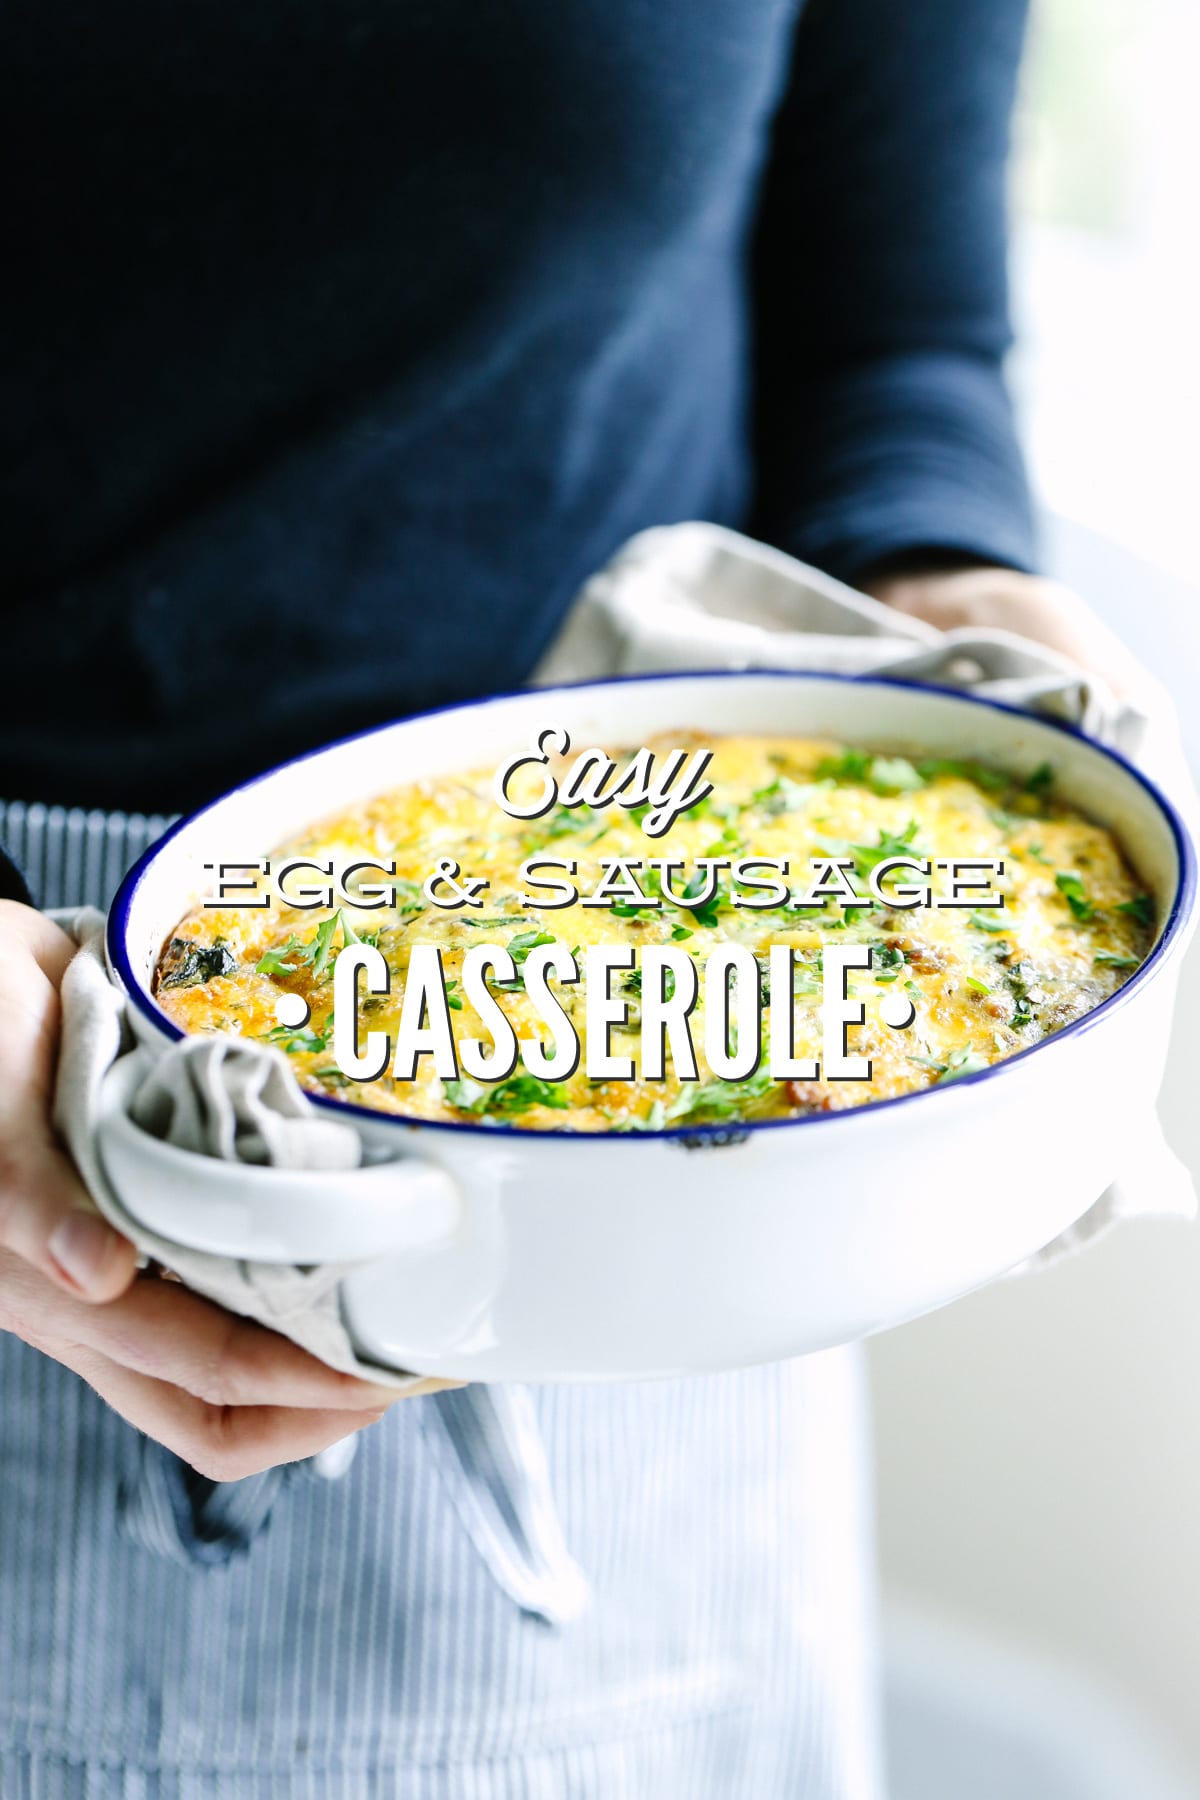 Easy Egg and Sausage Breakfast Casserole (with Make-Ahead Options)